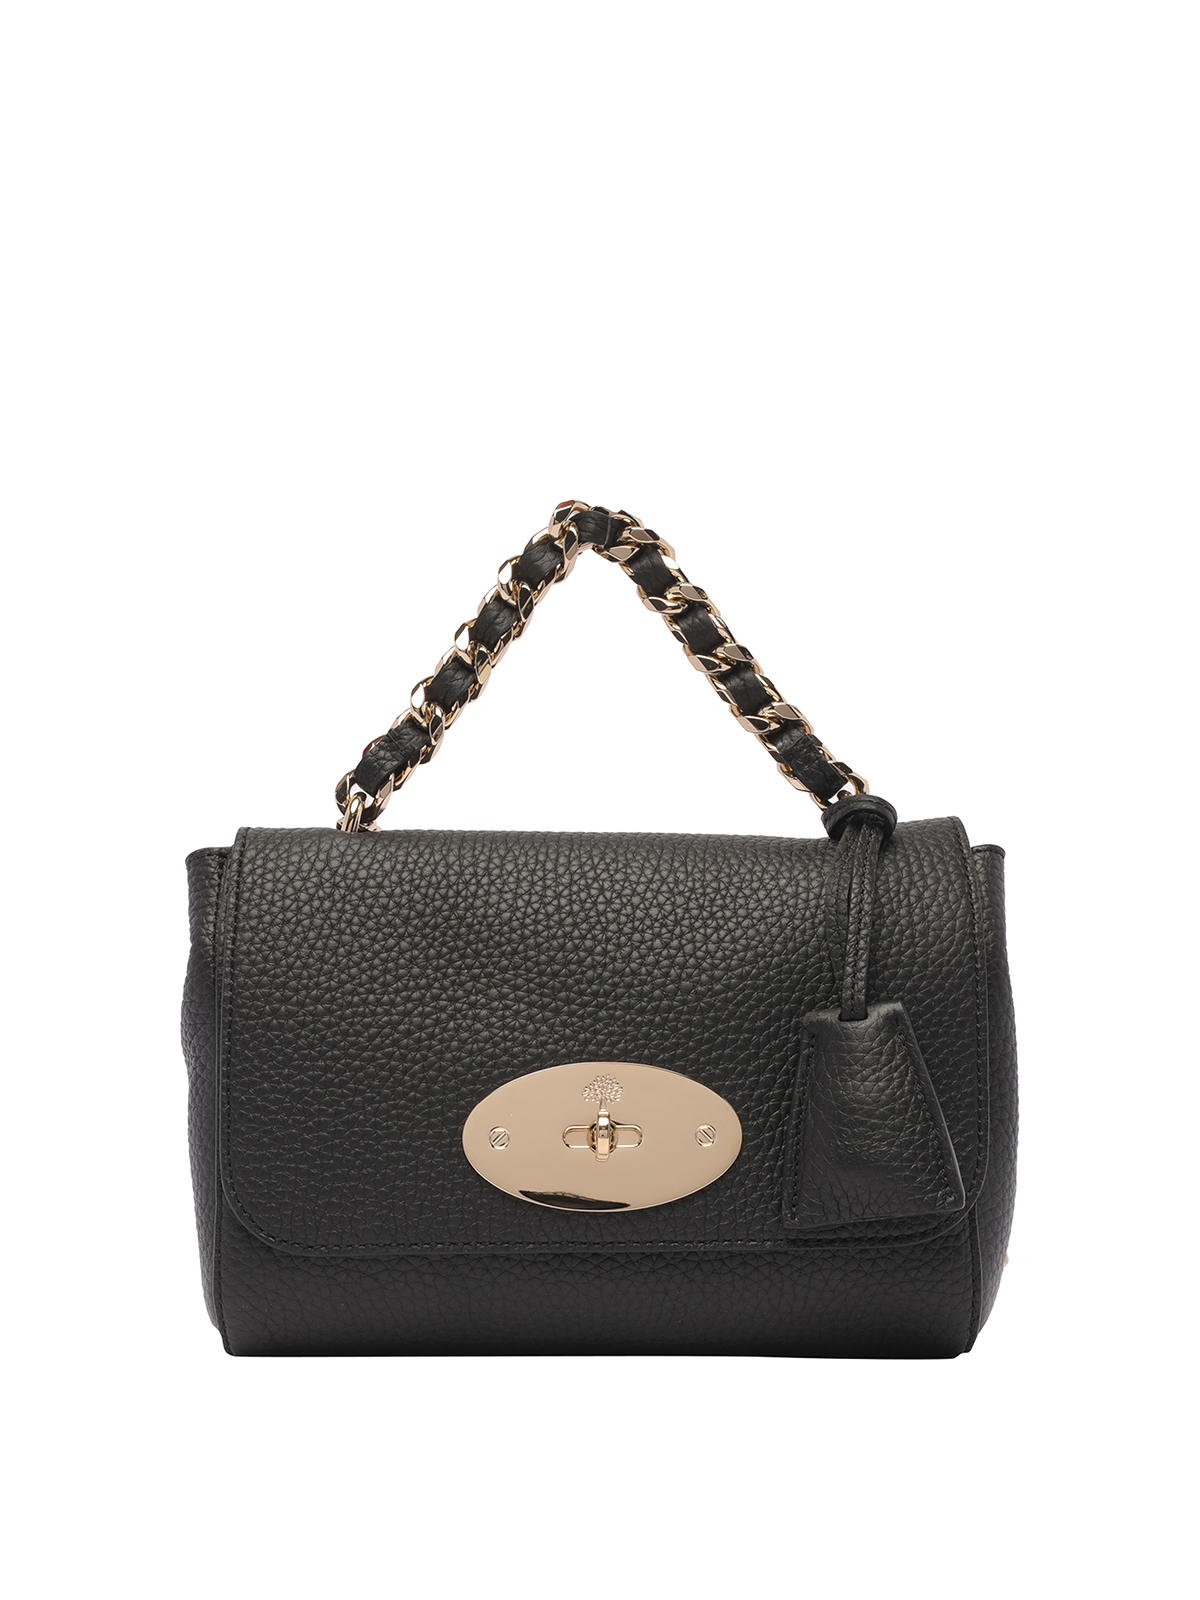 Mulberry Top Handle Lily Bag In Black